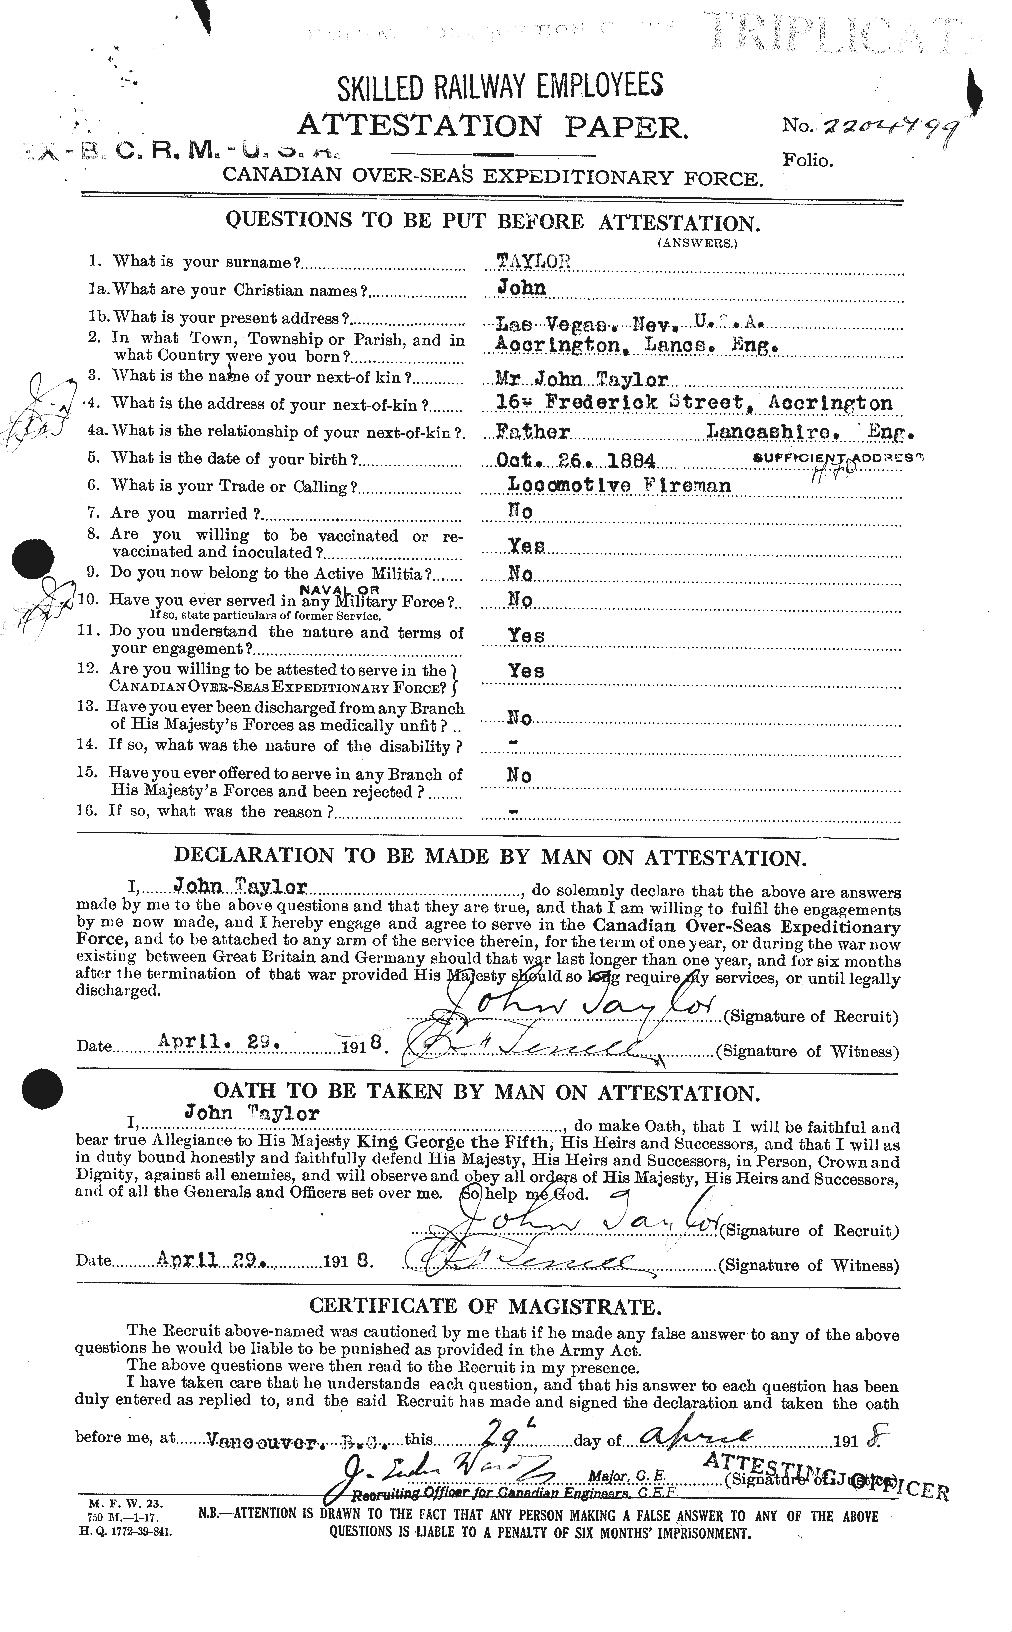 Personnel Records of the First World War - CEF 626980a